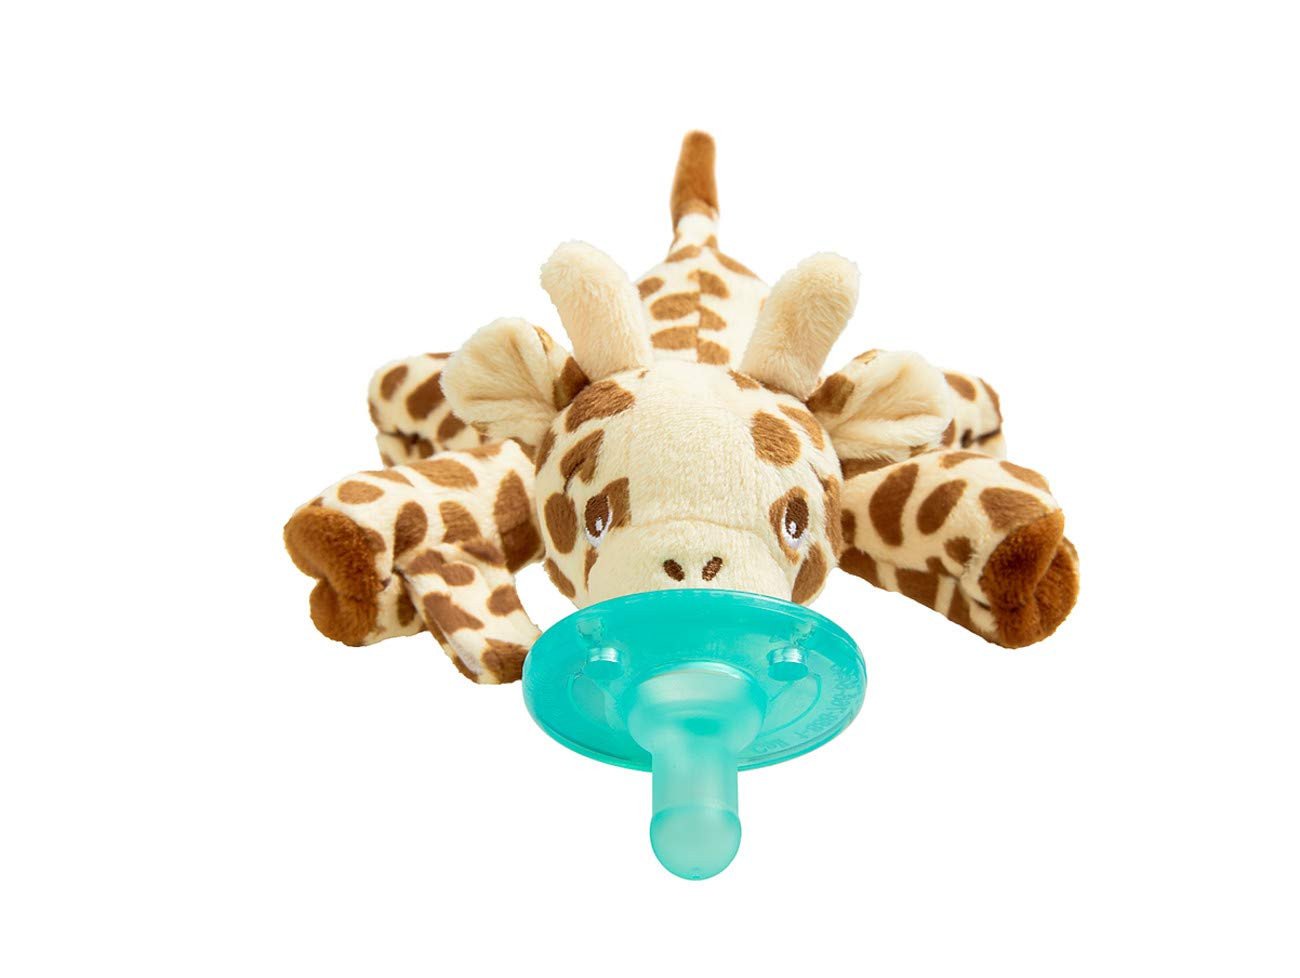 Philips Avent Soothie Snuggle Pacifier Holder with Detachable Pacifier, 0m+.